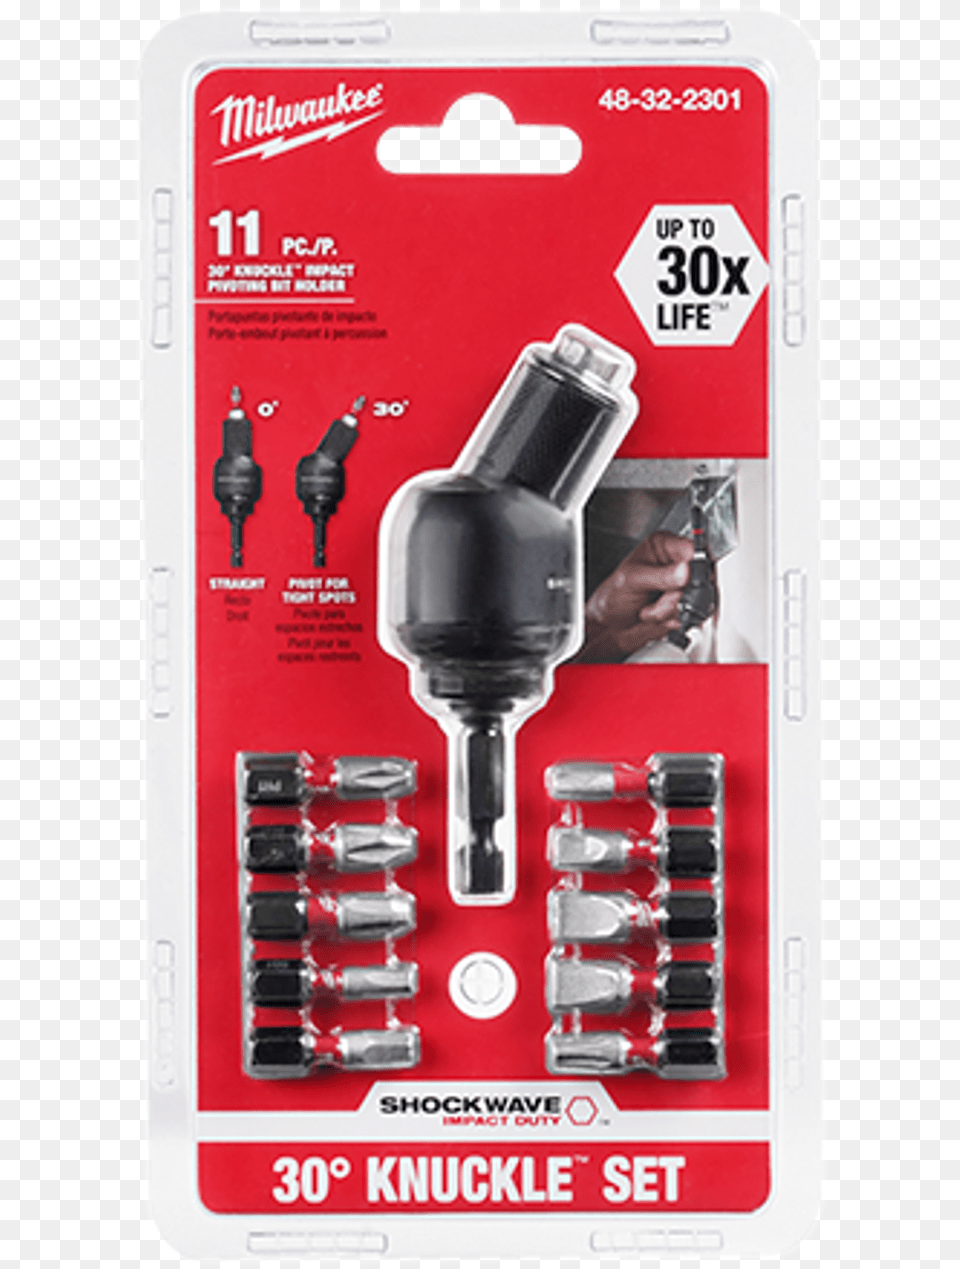 Shockwave 30 Knuckle 11 Pc Set Tool, Adapter, Electronics, Device, Screwdriver Free Png